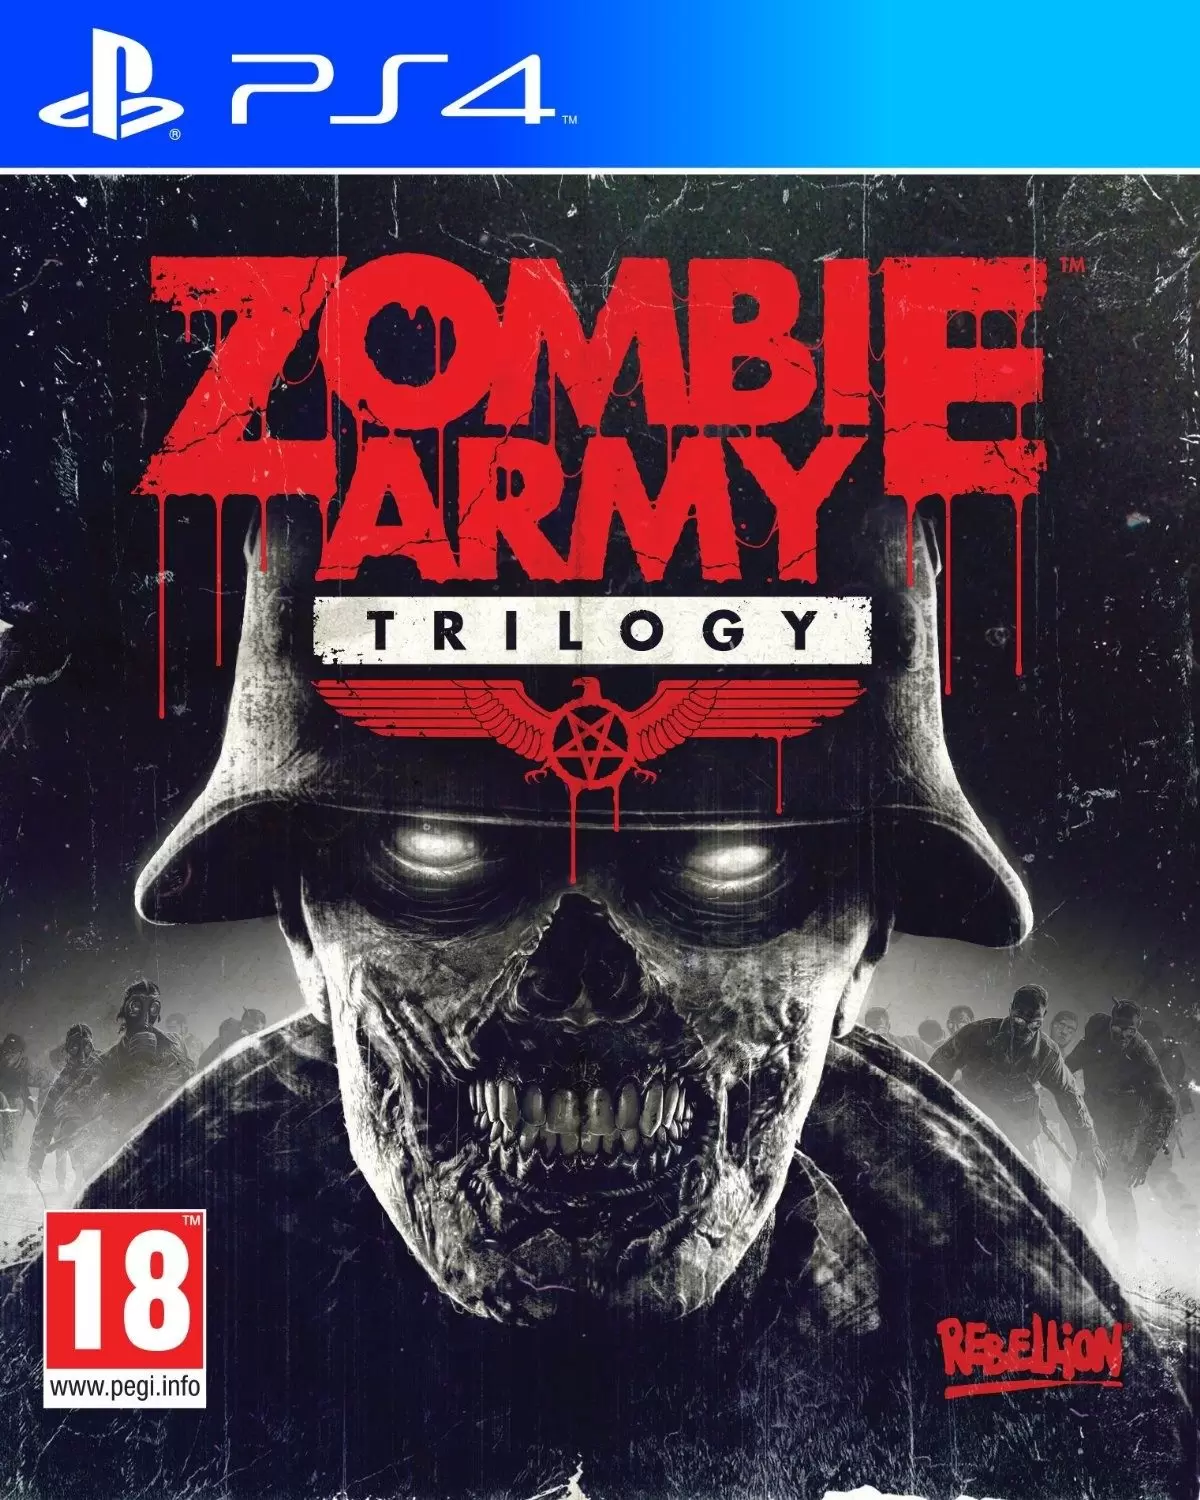 PS4 Games - Zombie Army Trilogy